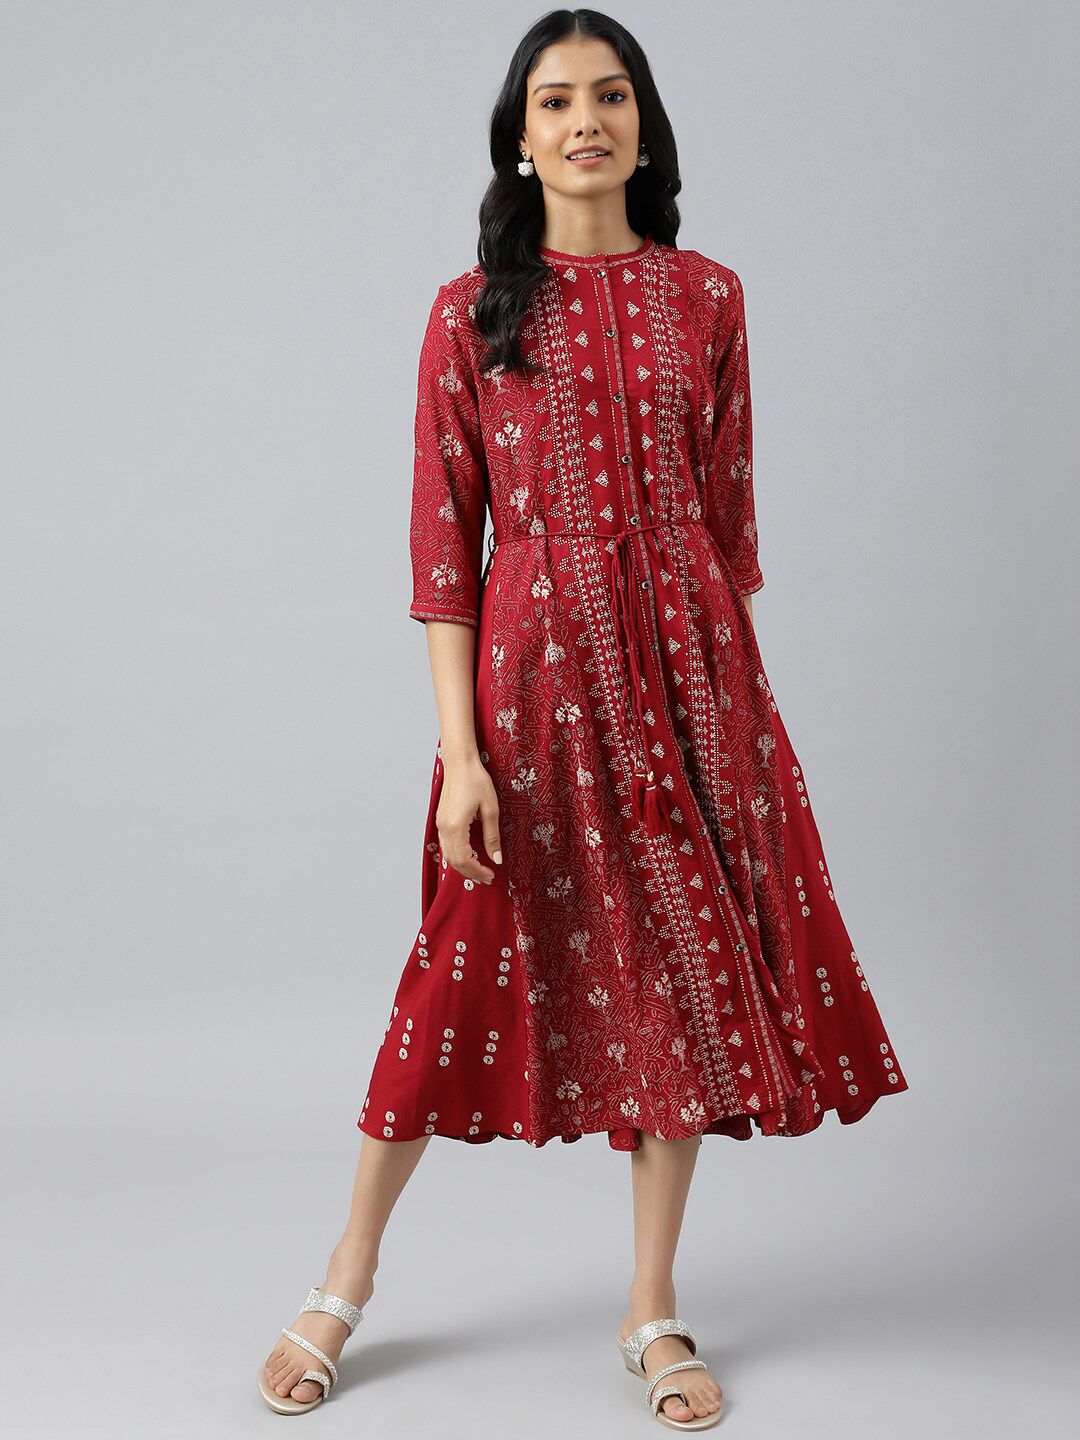 W Women Red Floral Printed A-Line Midi Dress Price in India